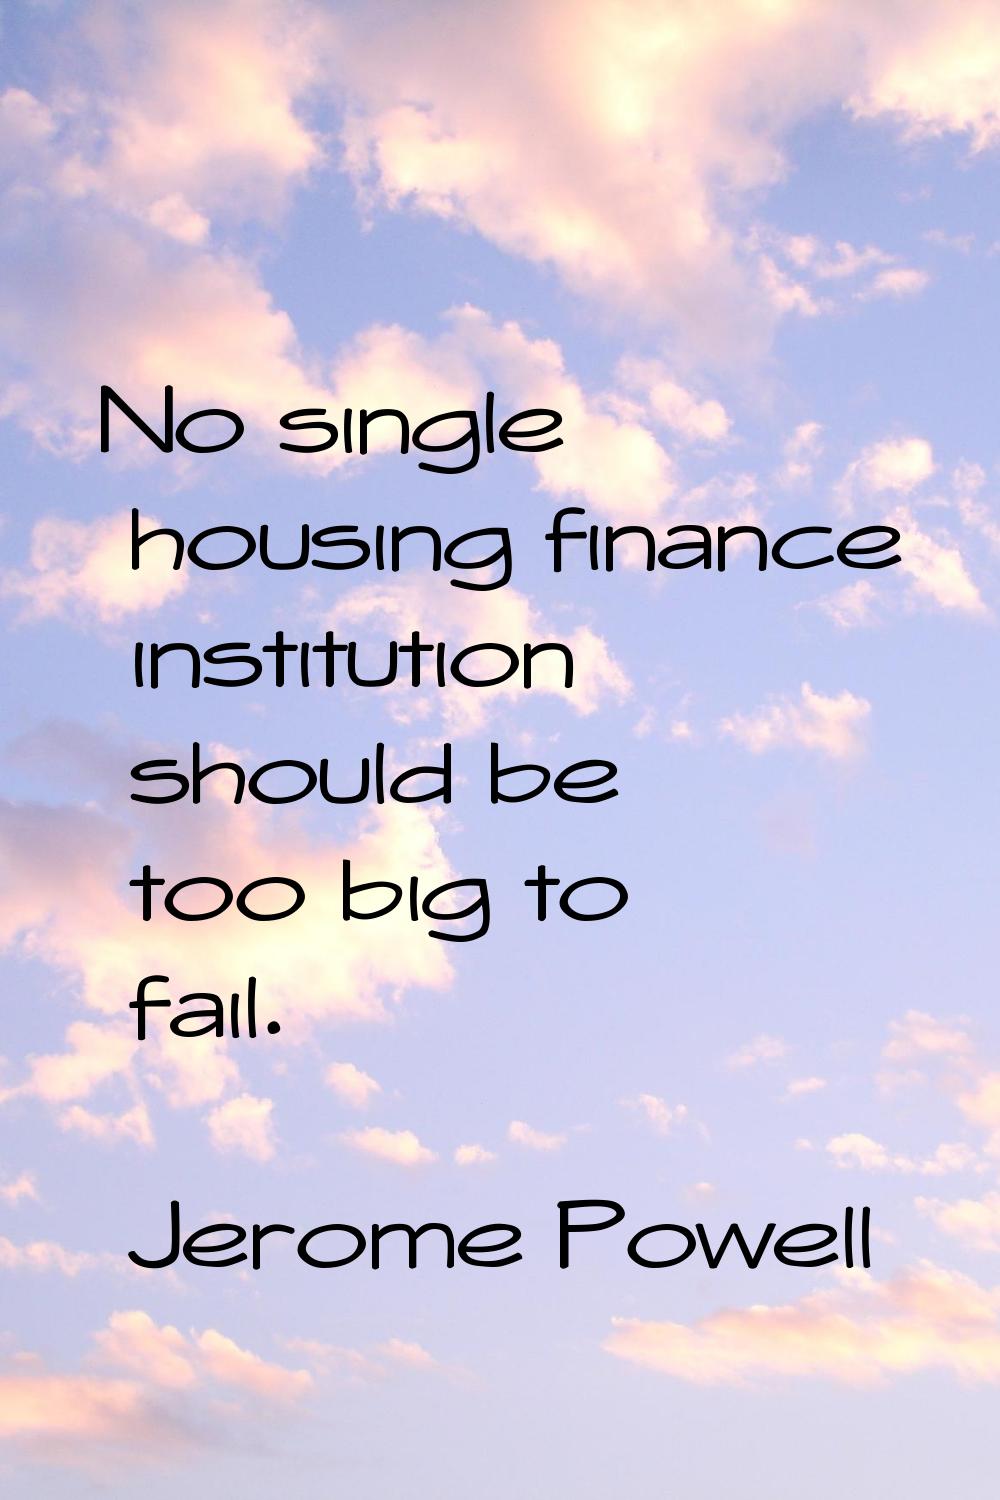 No single housing finance institution should be too big to fail.